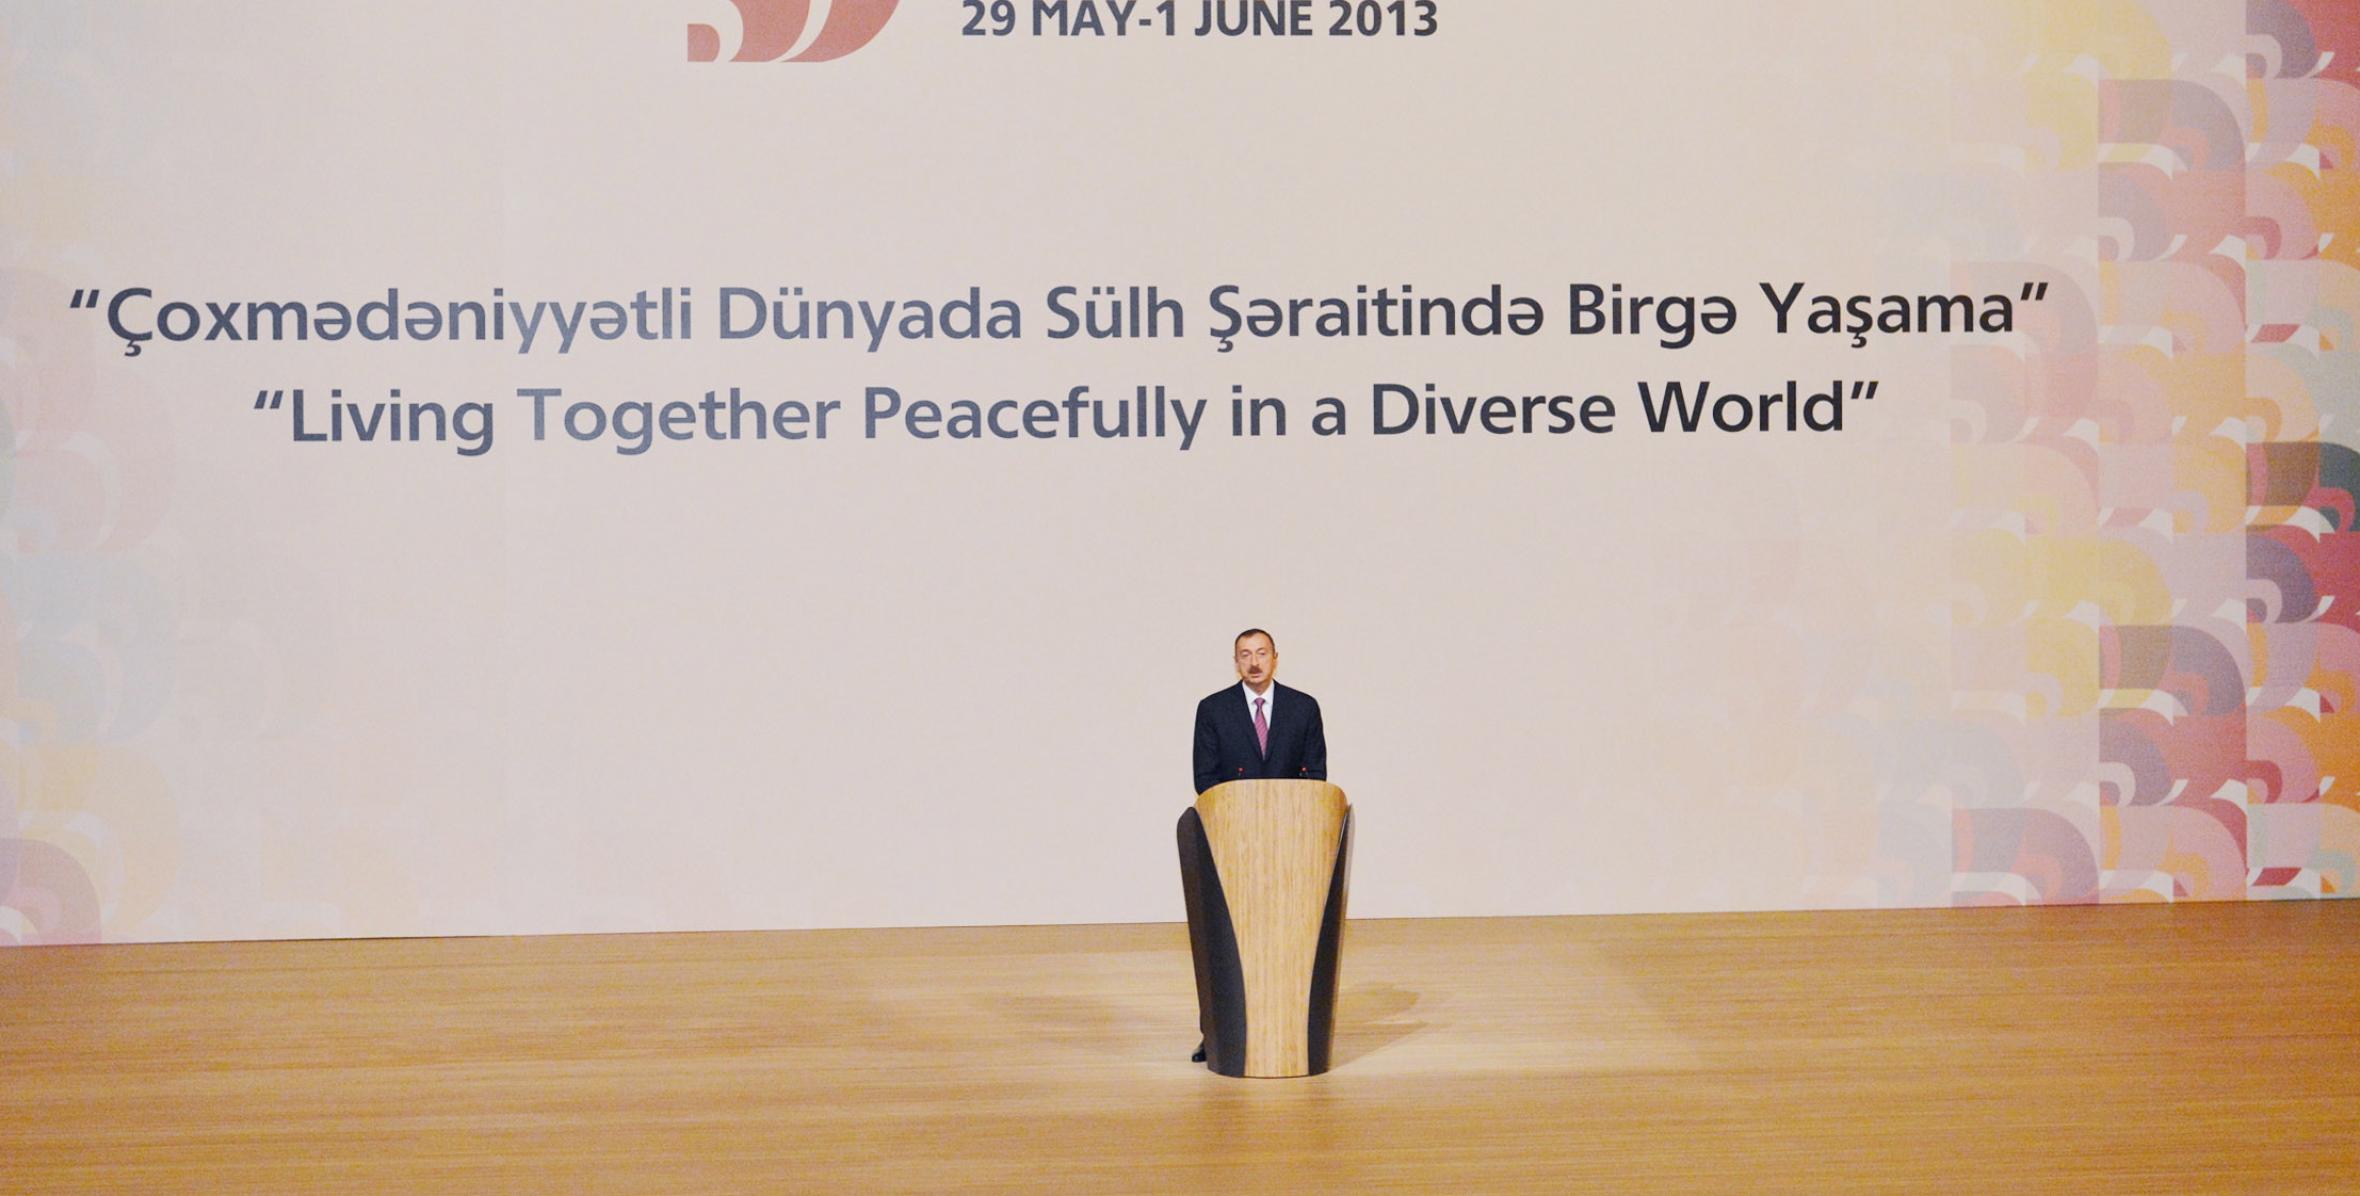 Ilham Aliyev attended the opening ceremony of the Second World Forum on Intercultural Dialogue